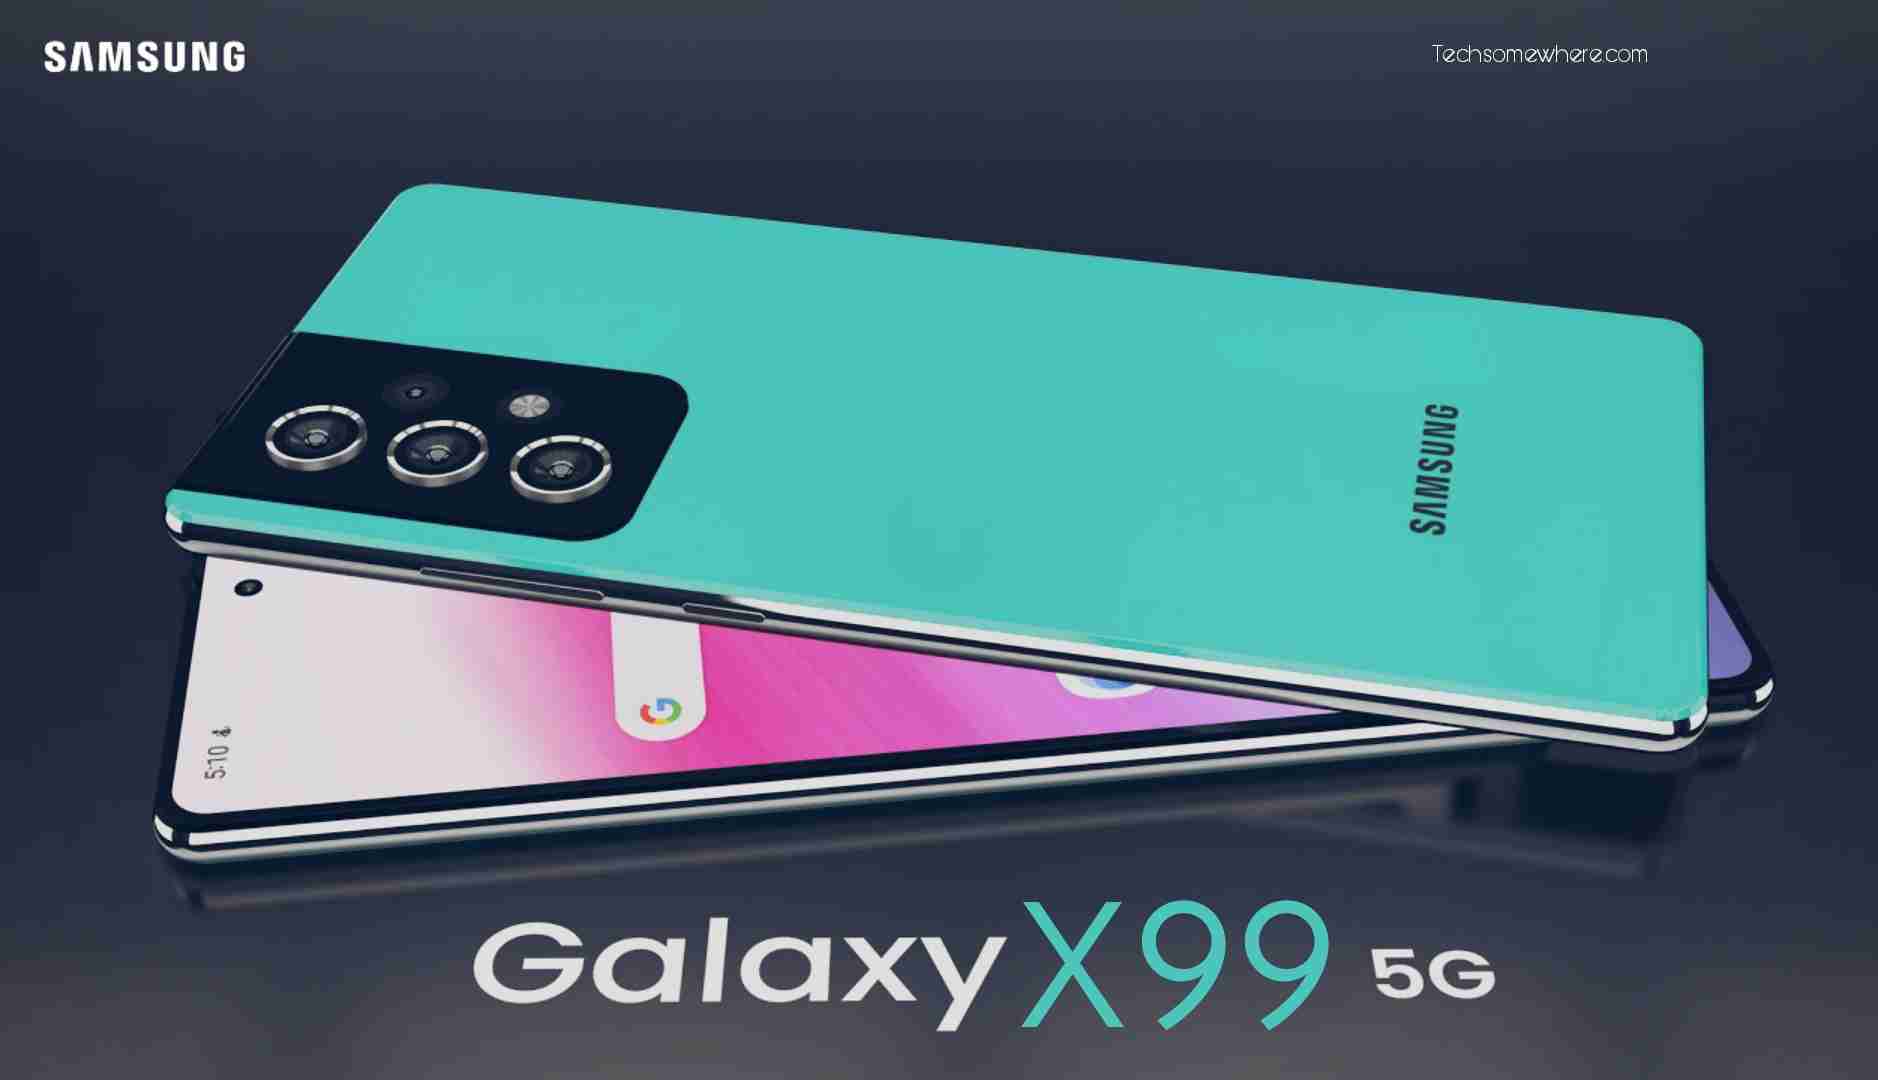 Samsung Galaxy X99 5G - Release Date, Price, Feature & News!